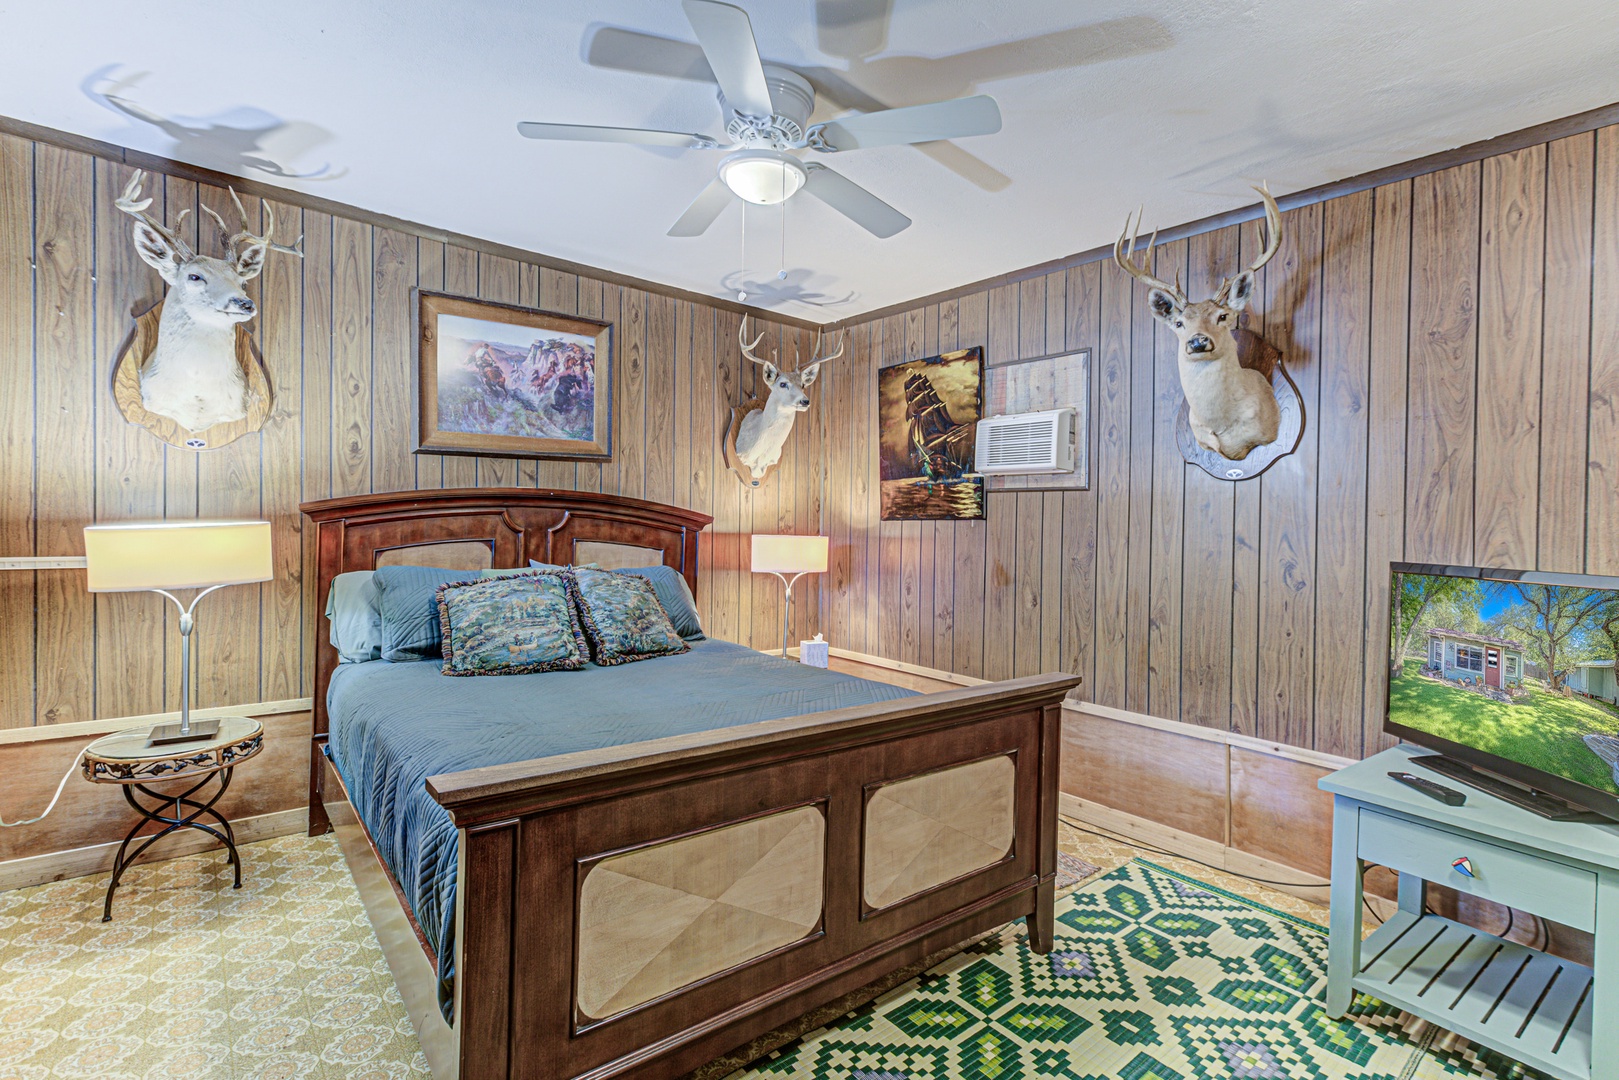 The bungalow bedroom includes a cozy full bed, Smart TV, & ensuite bath